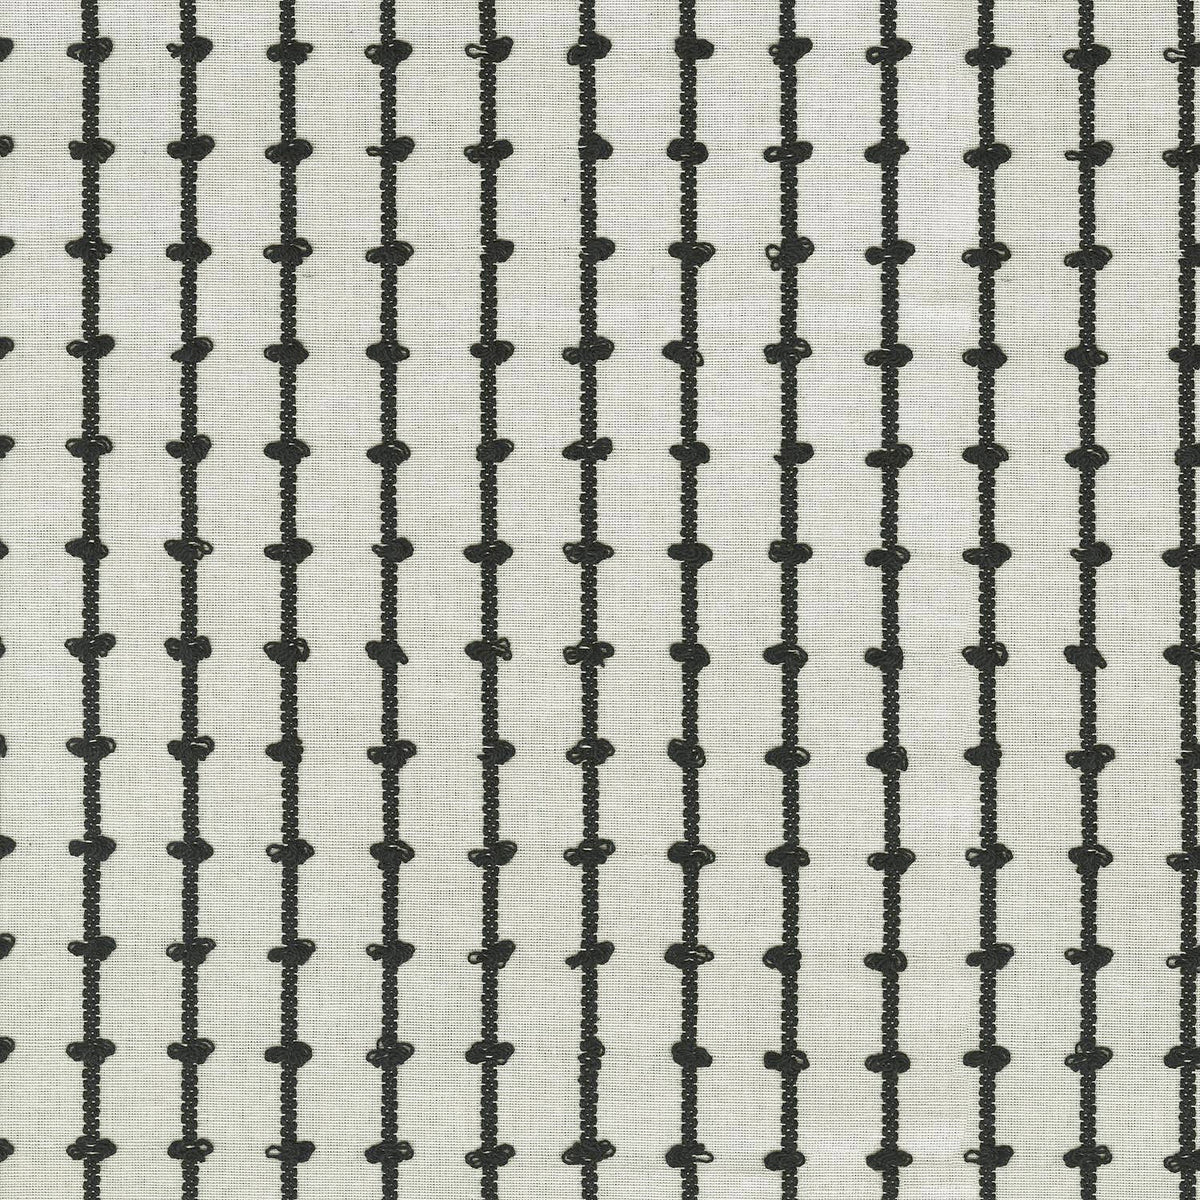 P/K Lifestyles Loops - Domino 410610 Upholstery Fabric